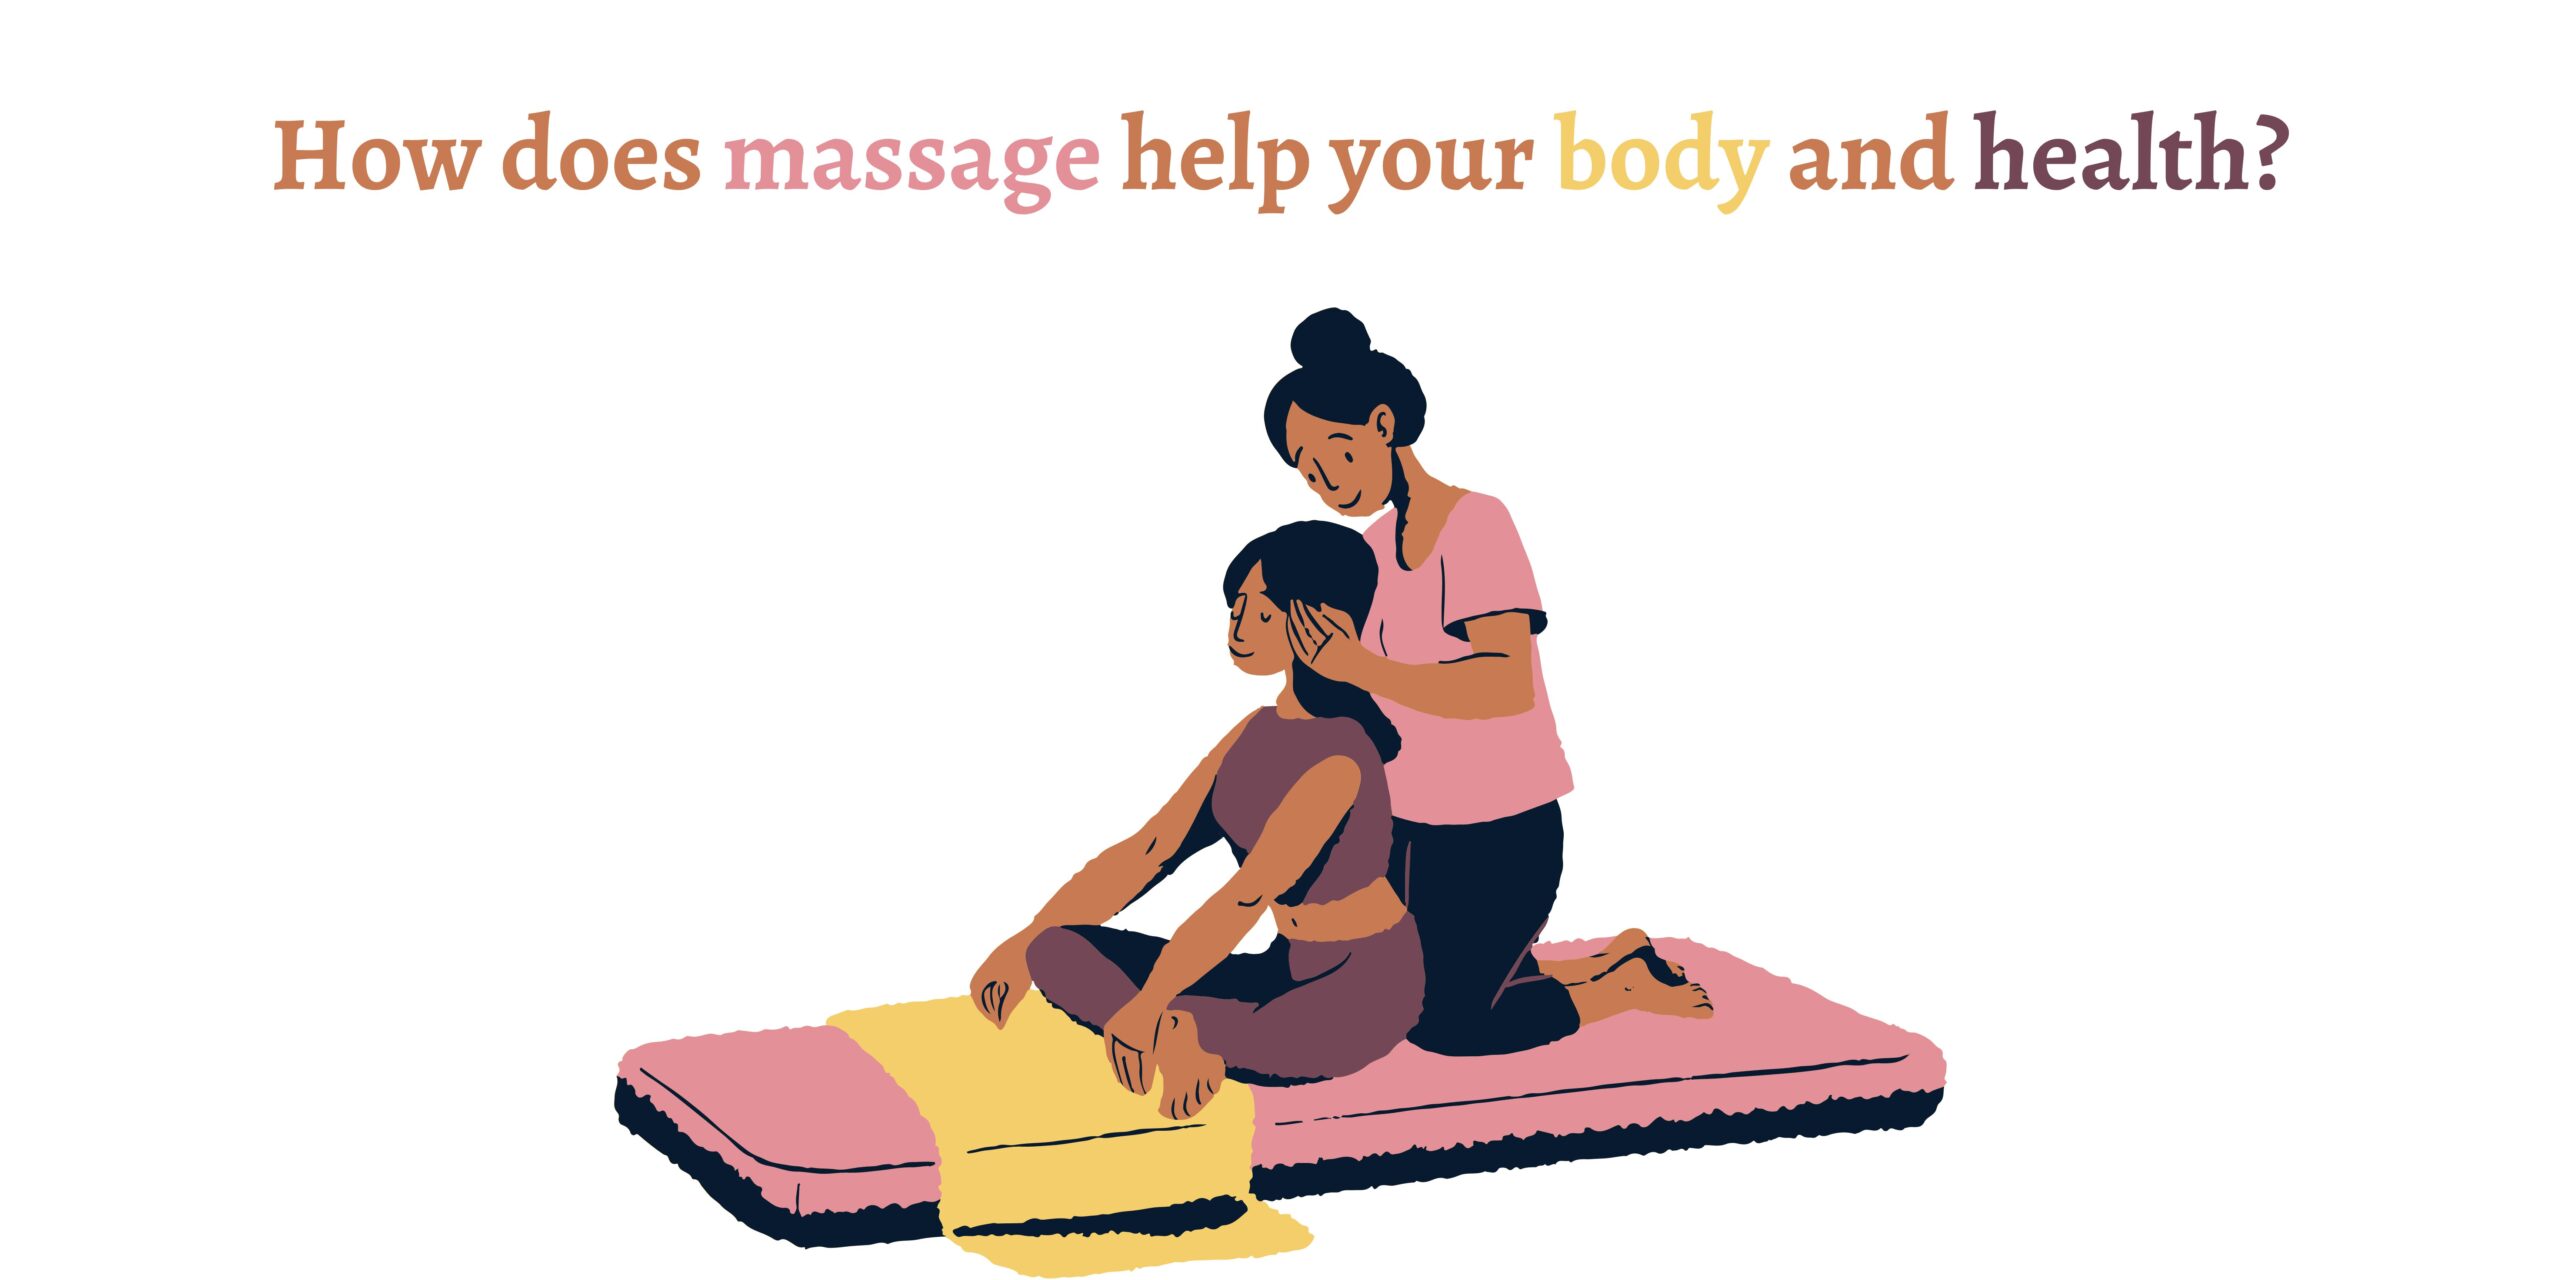 How does massage help your body and health?